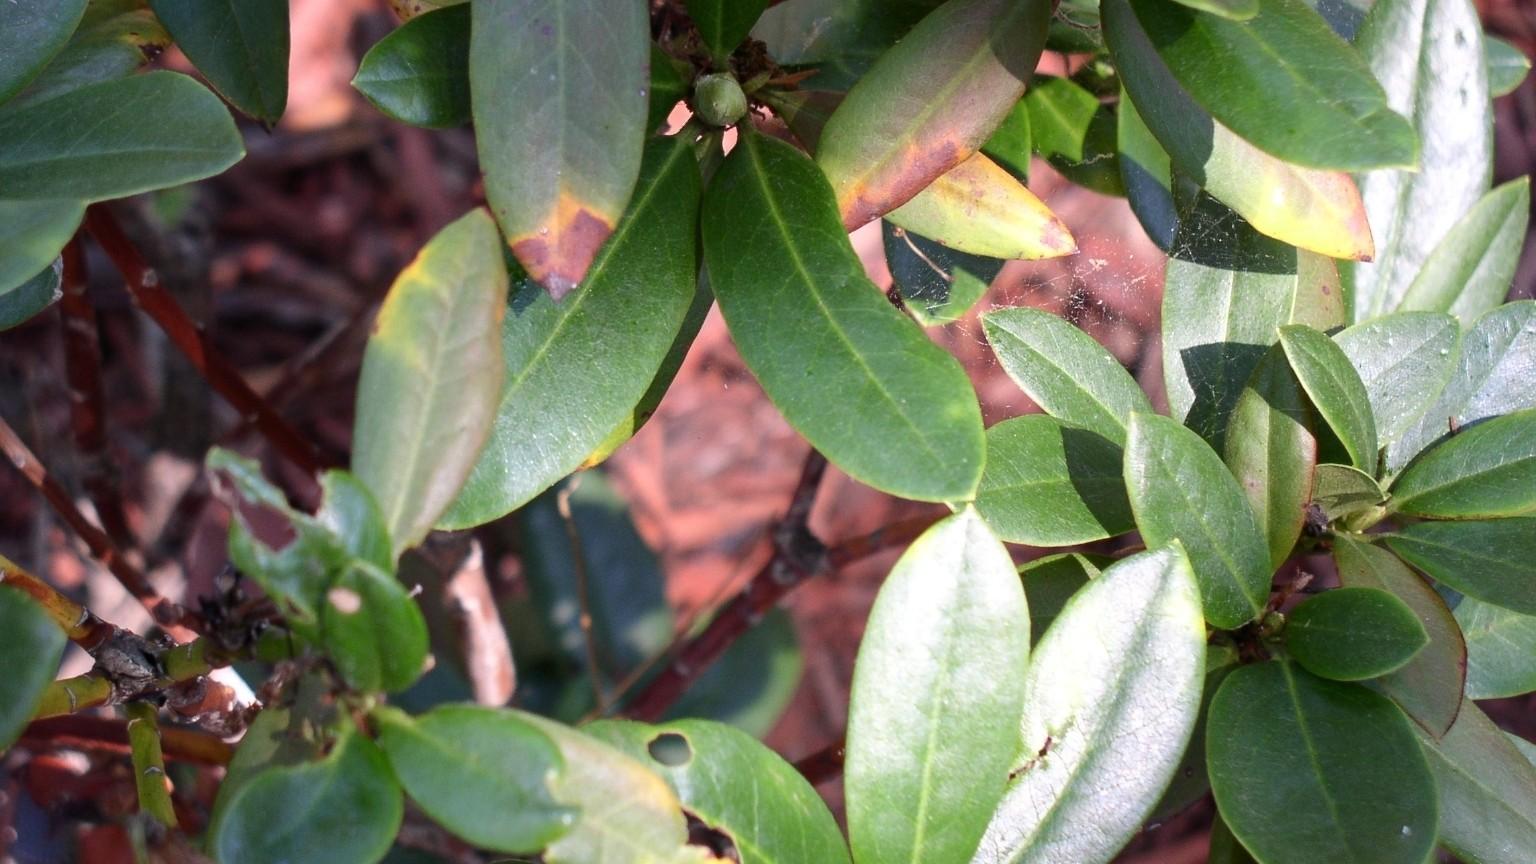 phytophthora root and crown root symptoms on rhododendron